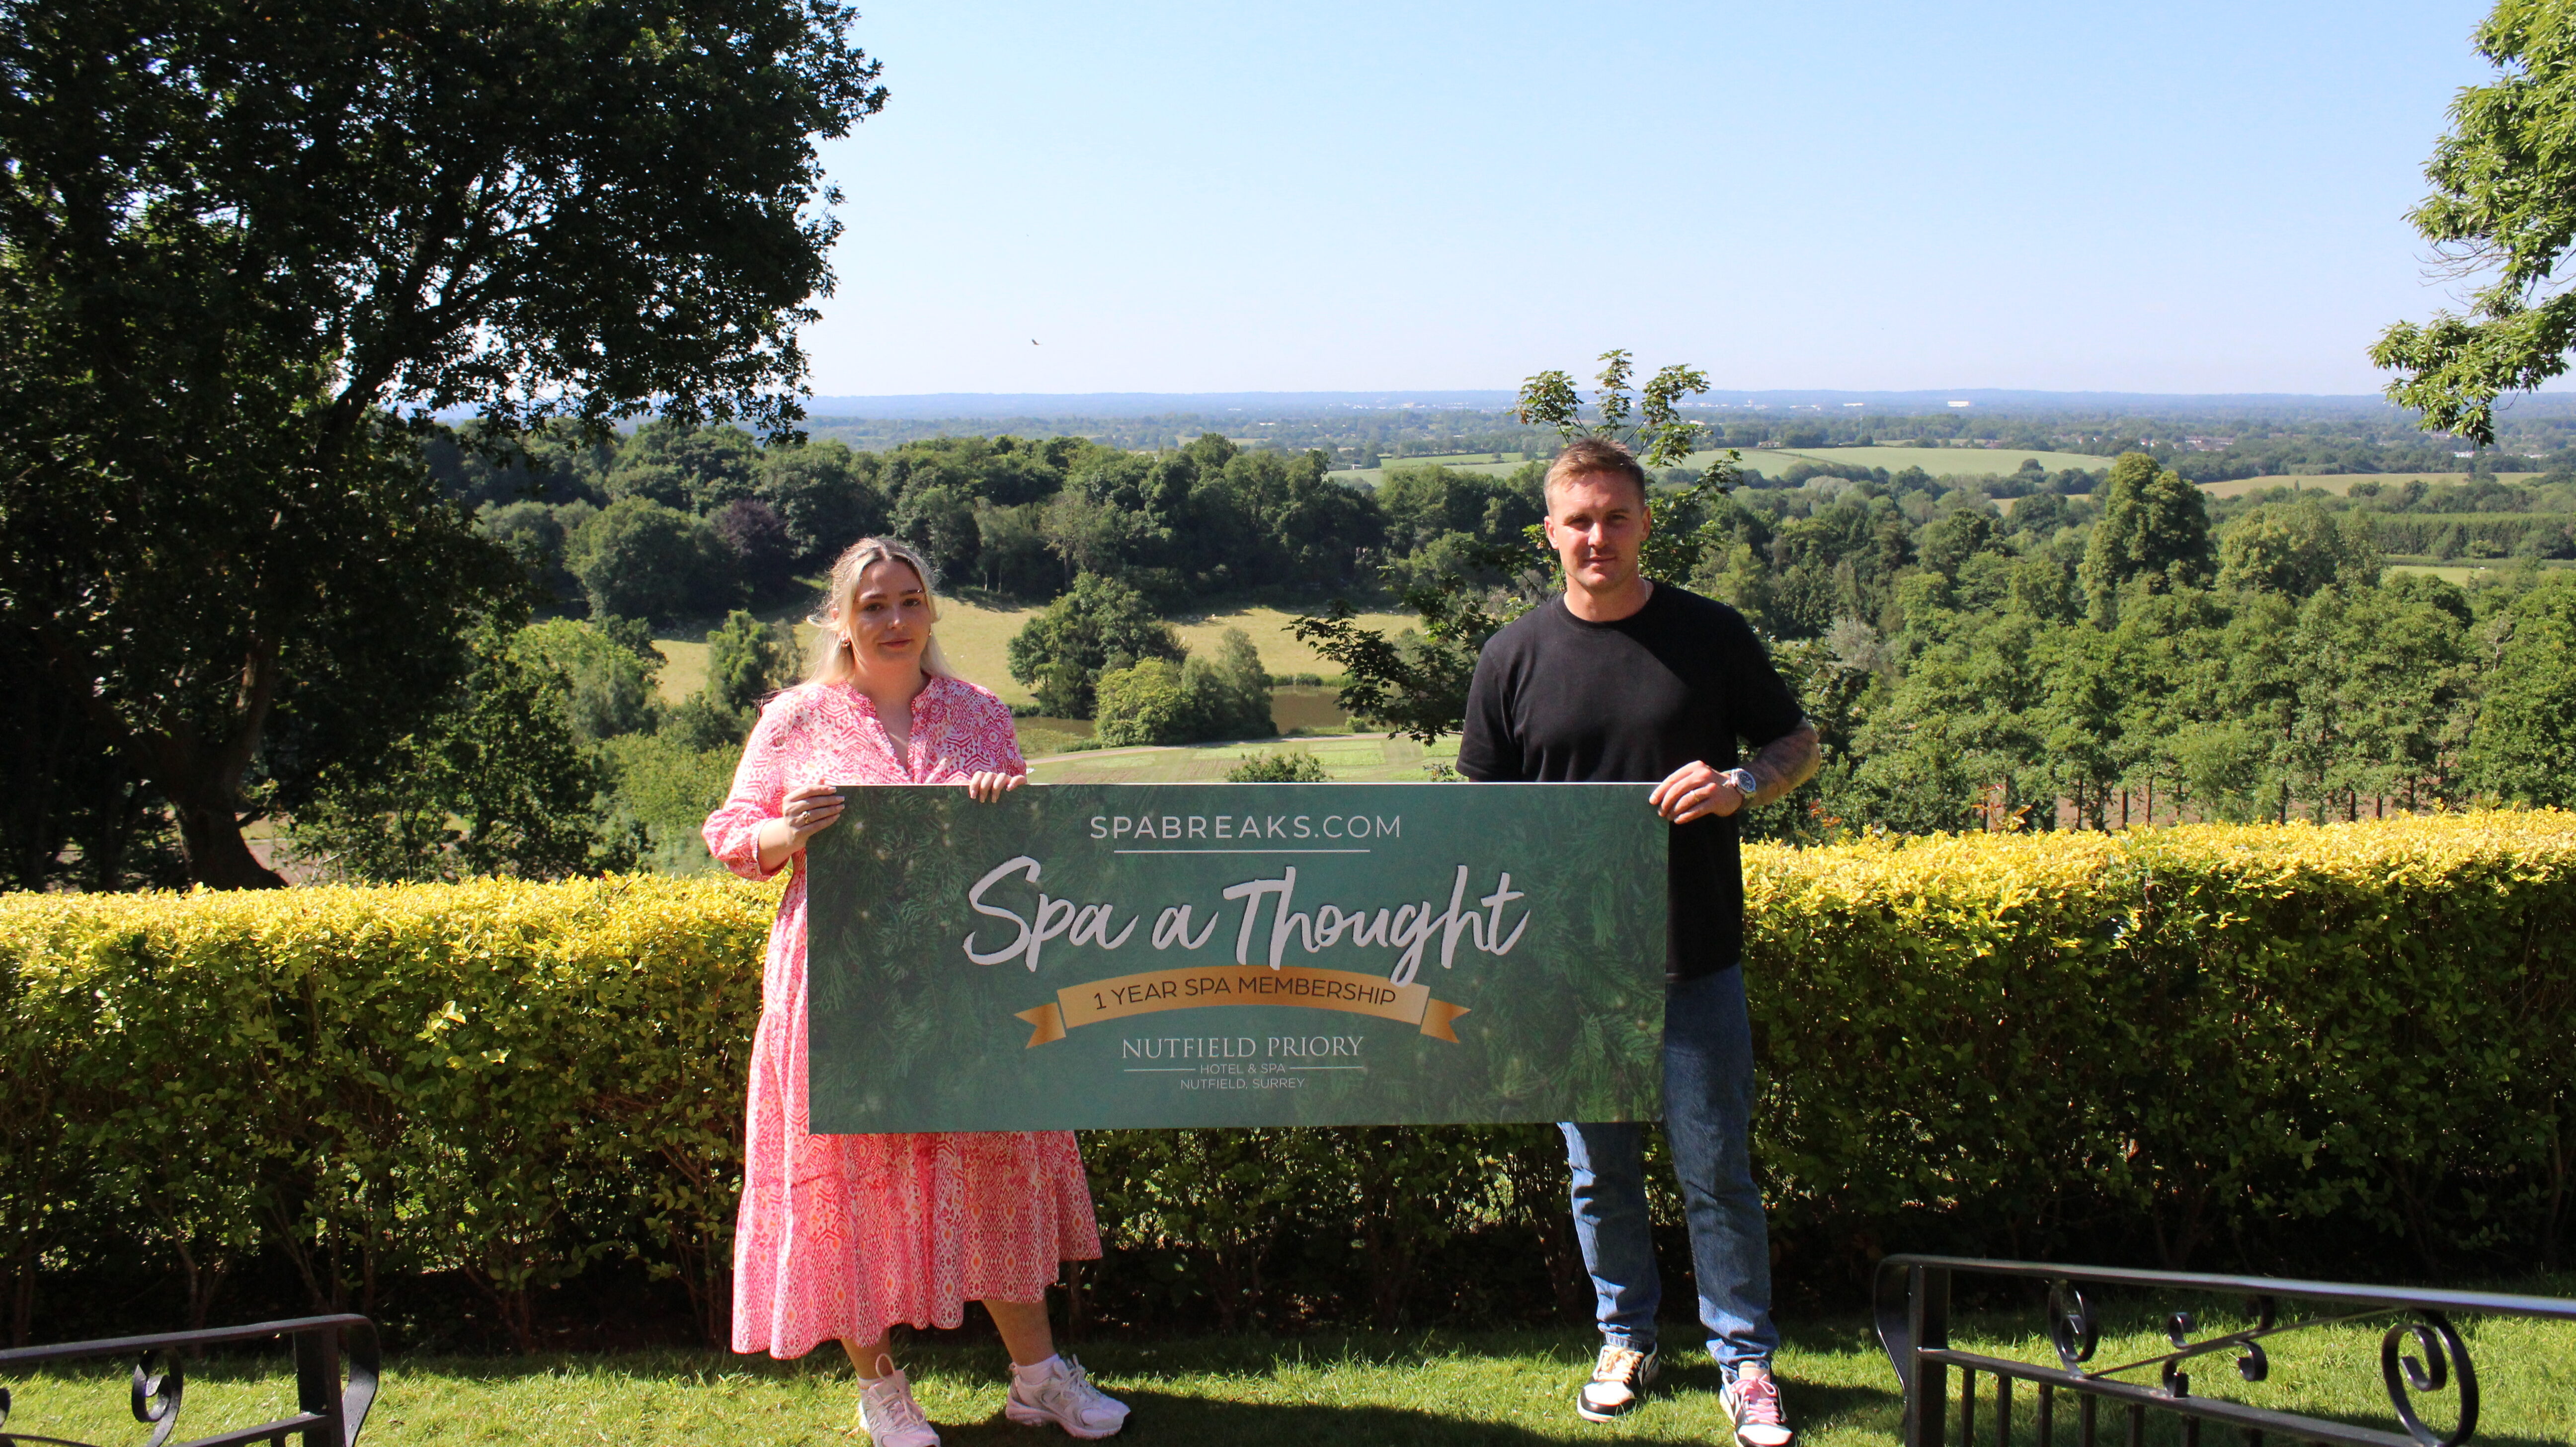 Spabreaks.com ambassador Jason Roy presented the year-long spa membership to ‘Spa a Thought’ campaign winner Elle Powers at Nutfield Priory Hotel & Spa